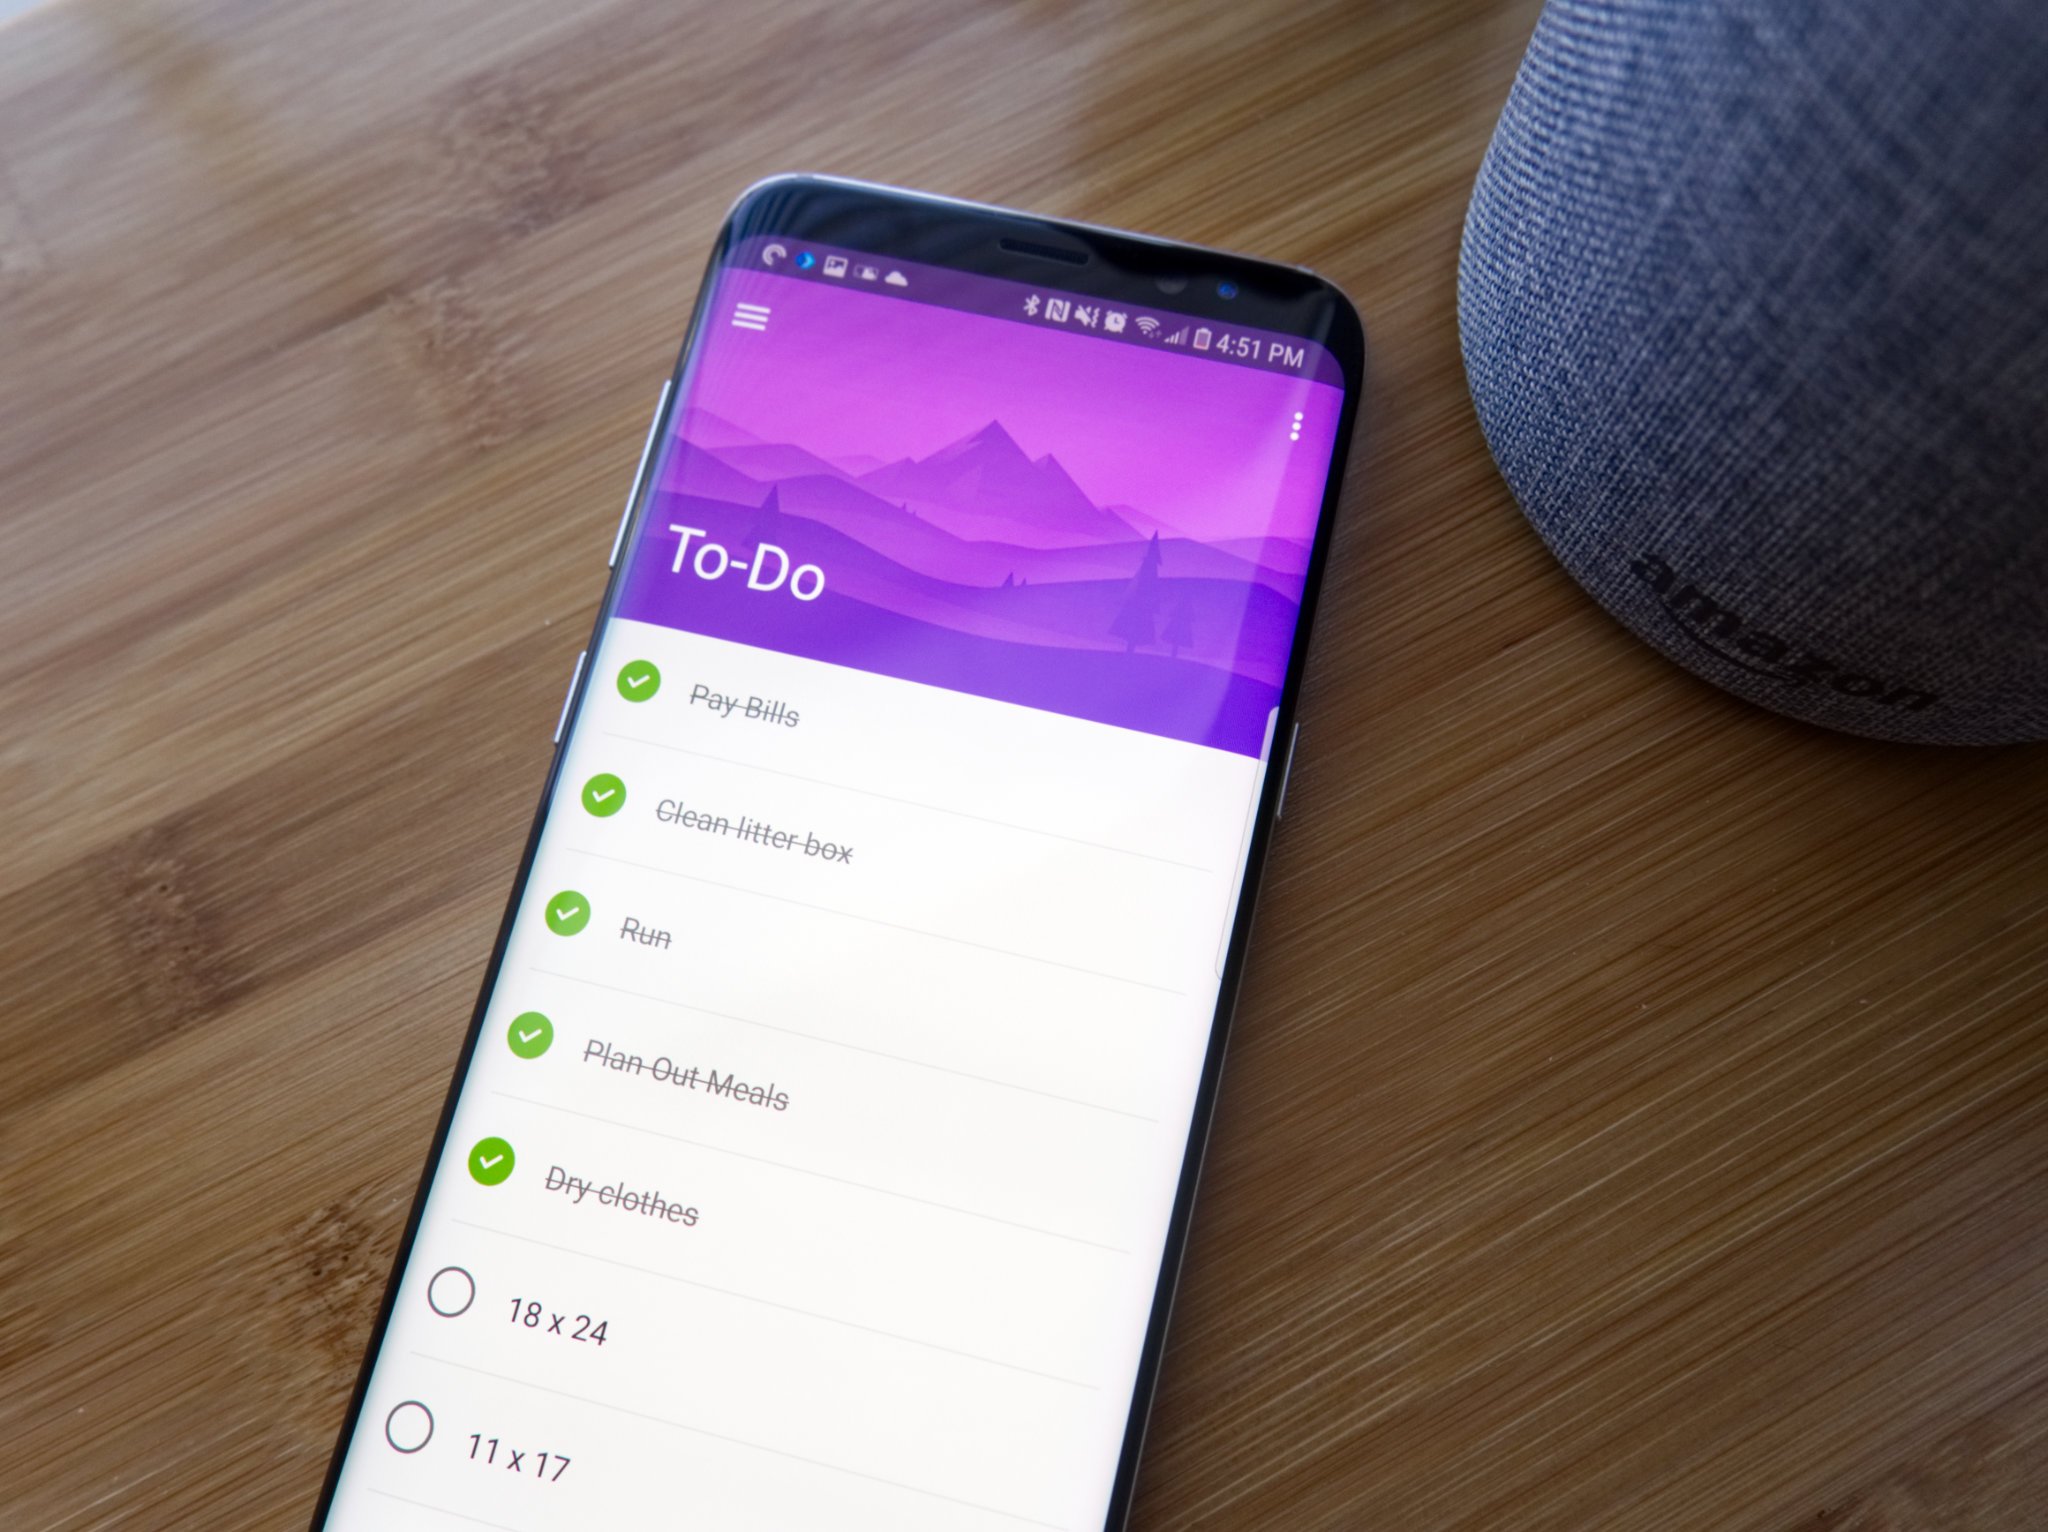 Microsoft To-Do now works with multiple accounts on Android